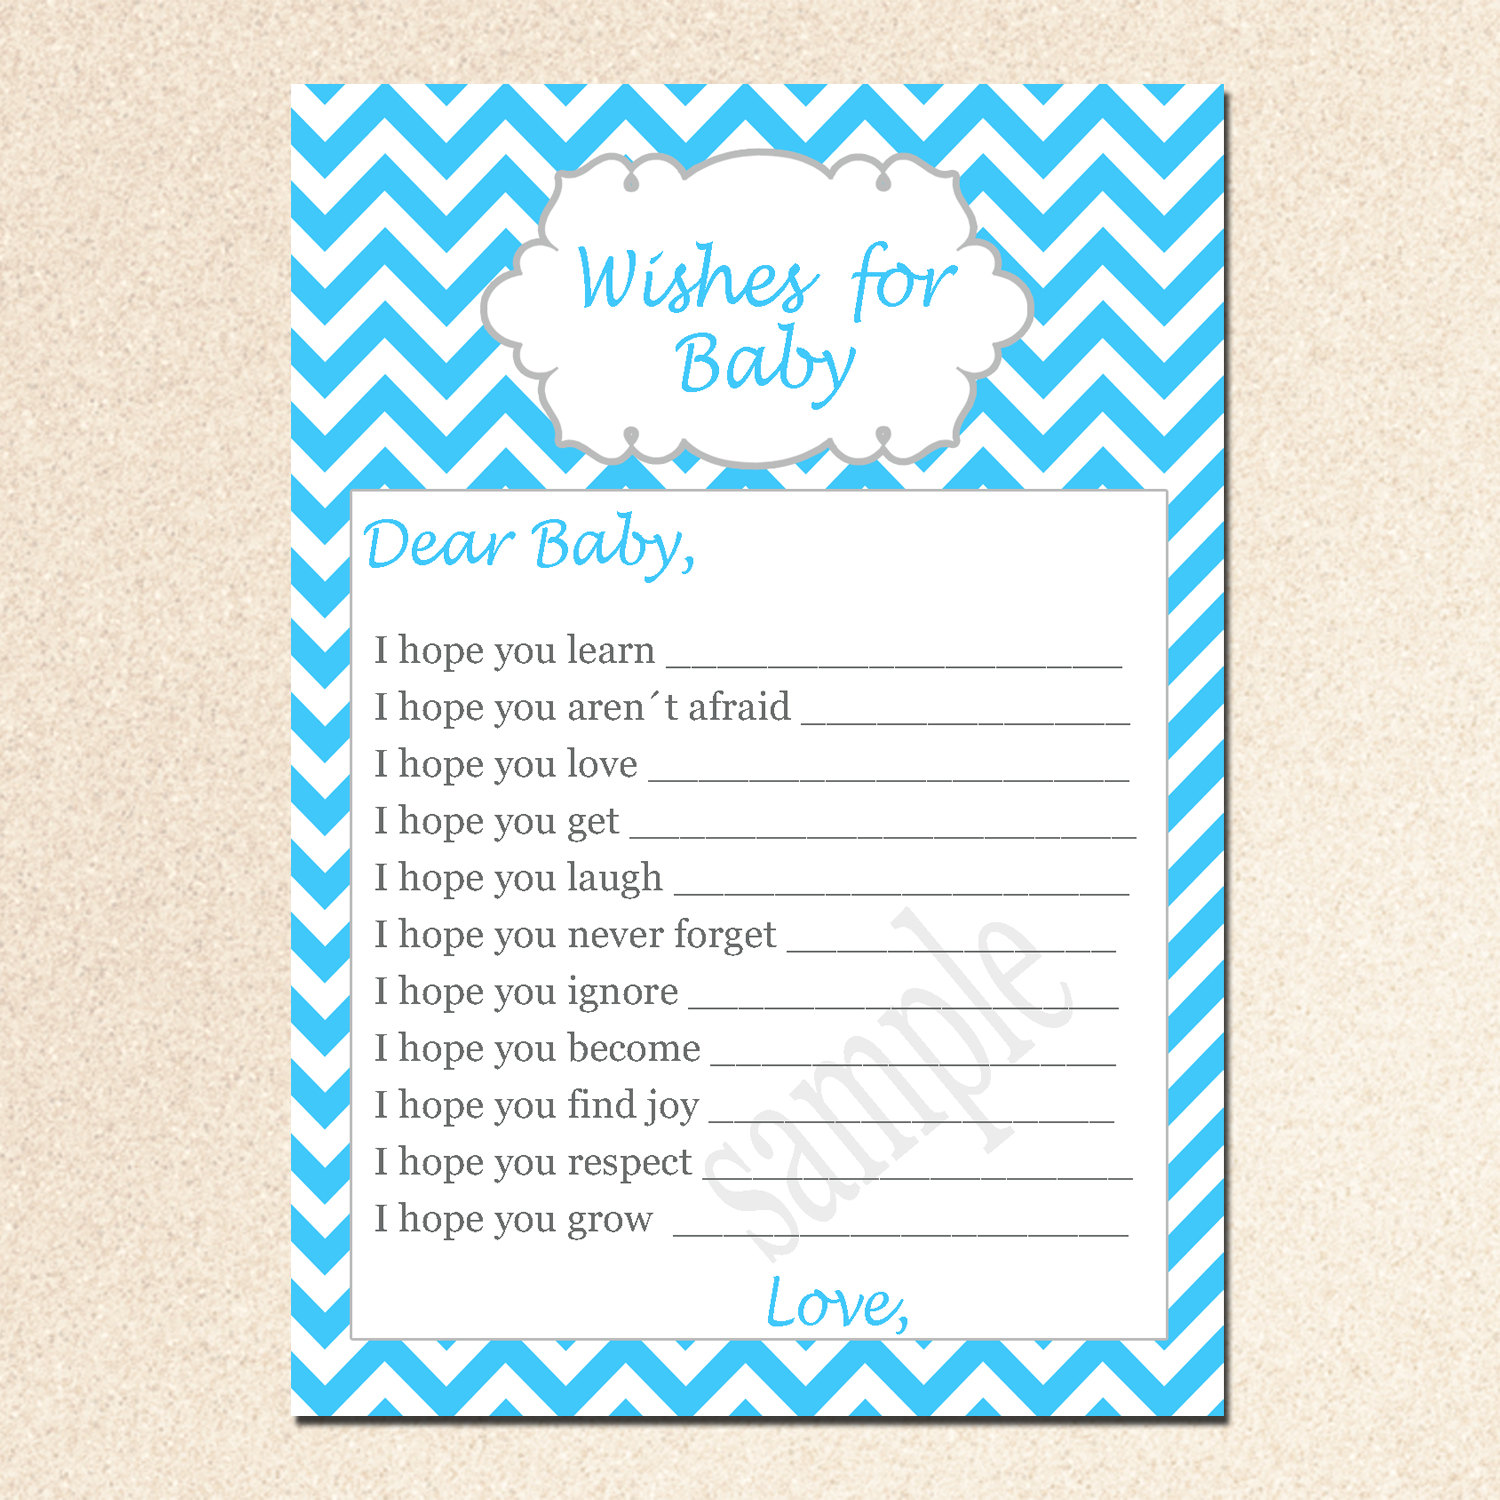 5-best-images-of-free-printable-baby-wishes-cards-free-printable-baby